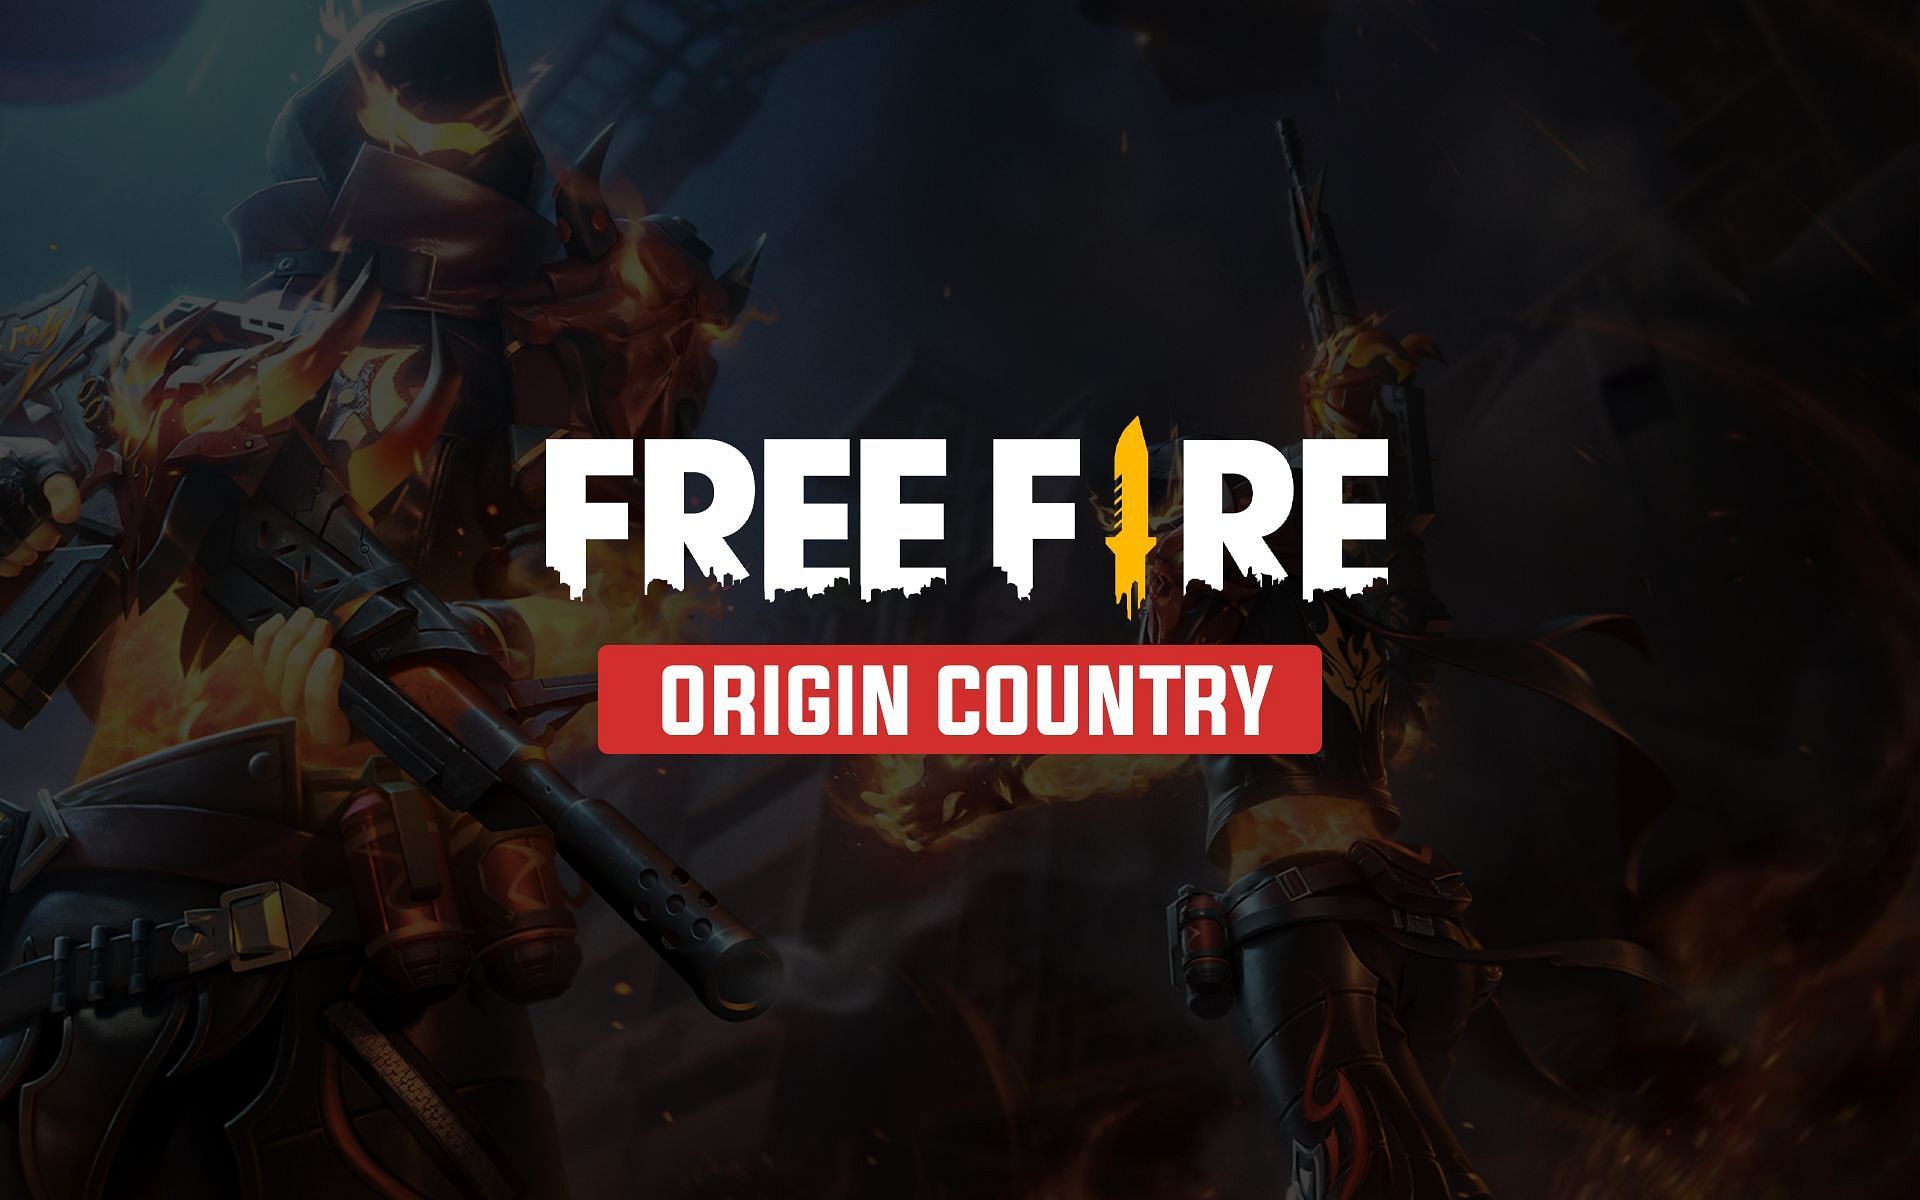 Details about Free Fire&#039;s developers, origin and more (Image via Sportskeeda)